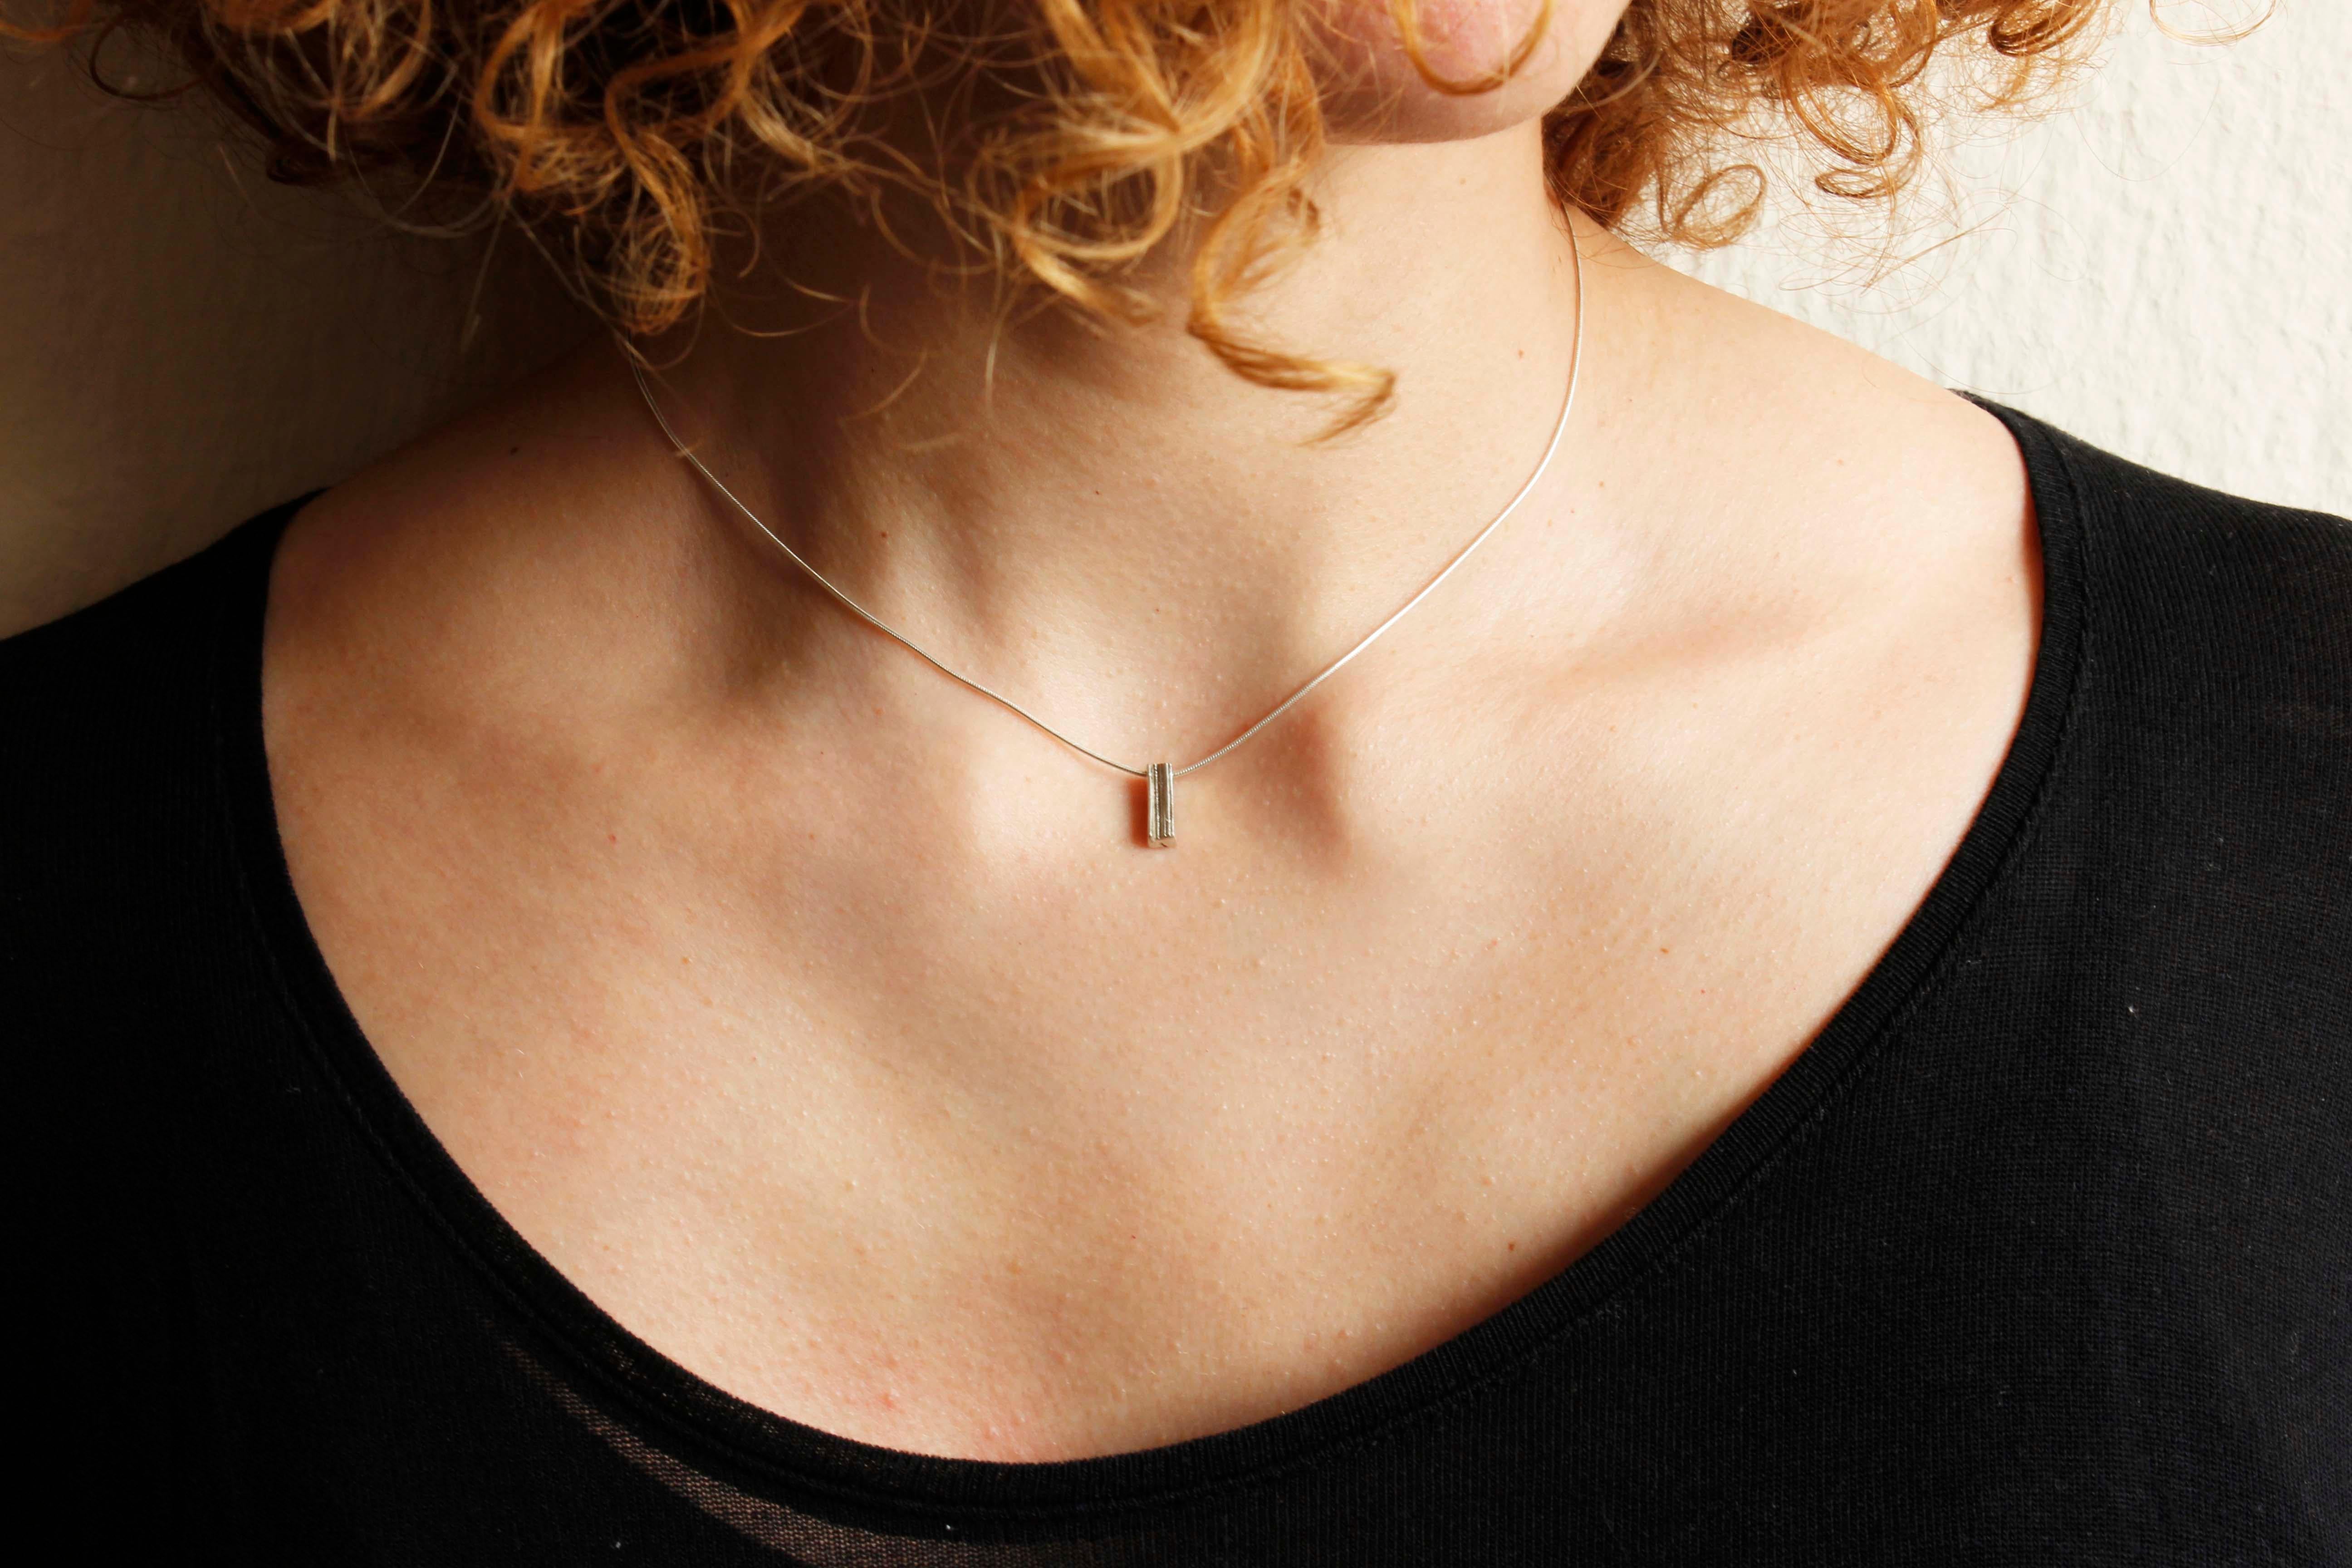 Minimal eco silver bar necklace with a sculptural surface, is perfect to give an extra detail to your outfit!

Made from eco silver sheets soldered together to create this unique texture of layers.

The necklace is part of project_x, a collection